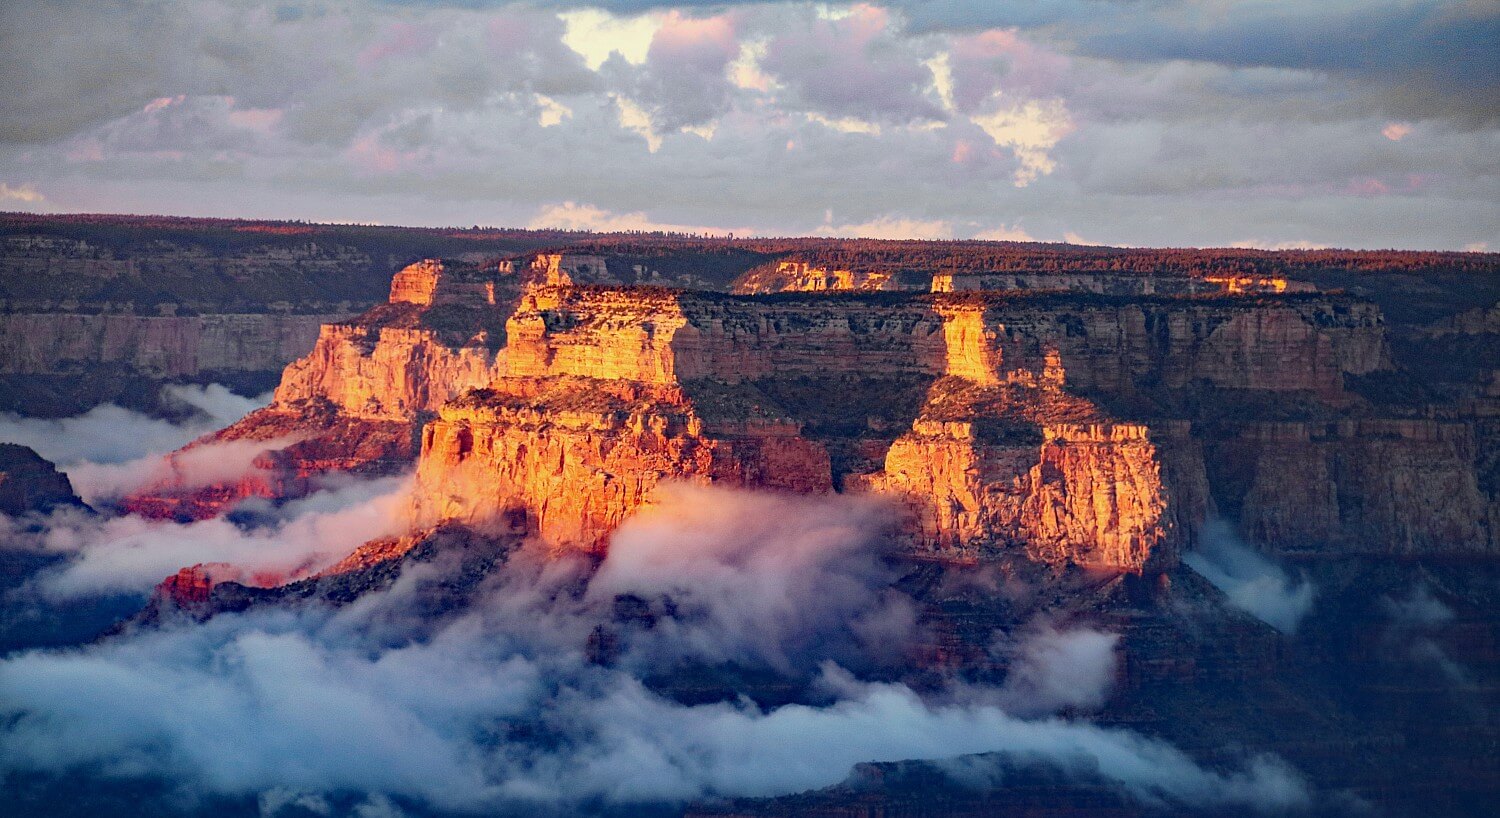 Morning sun shining on a stunning landscape of rock and canyon with low hanging clouds in the valley